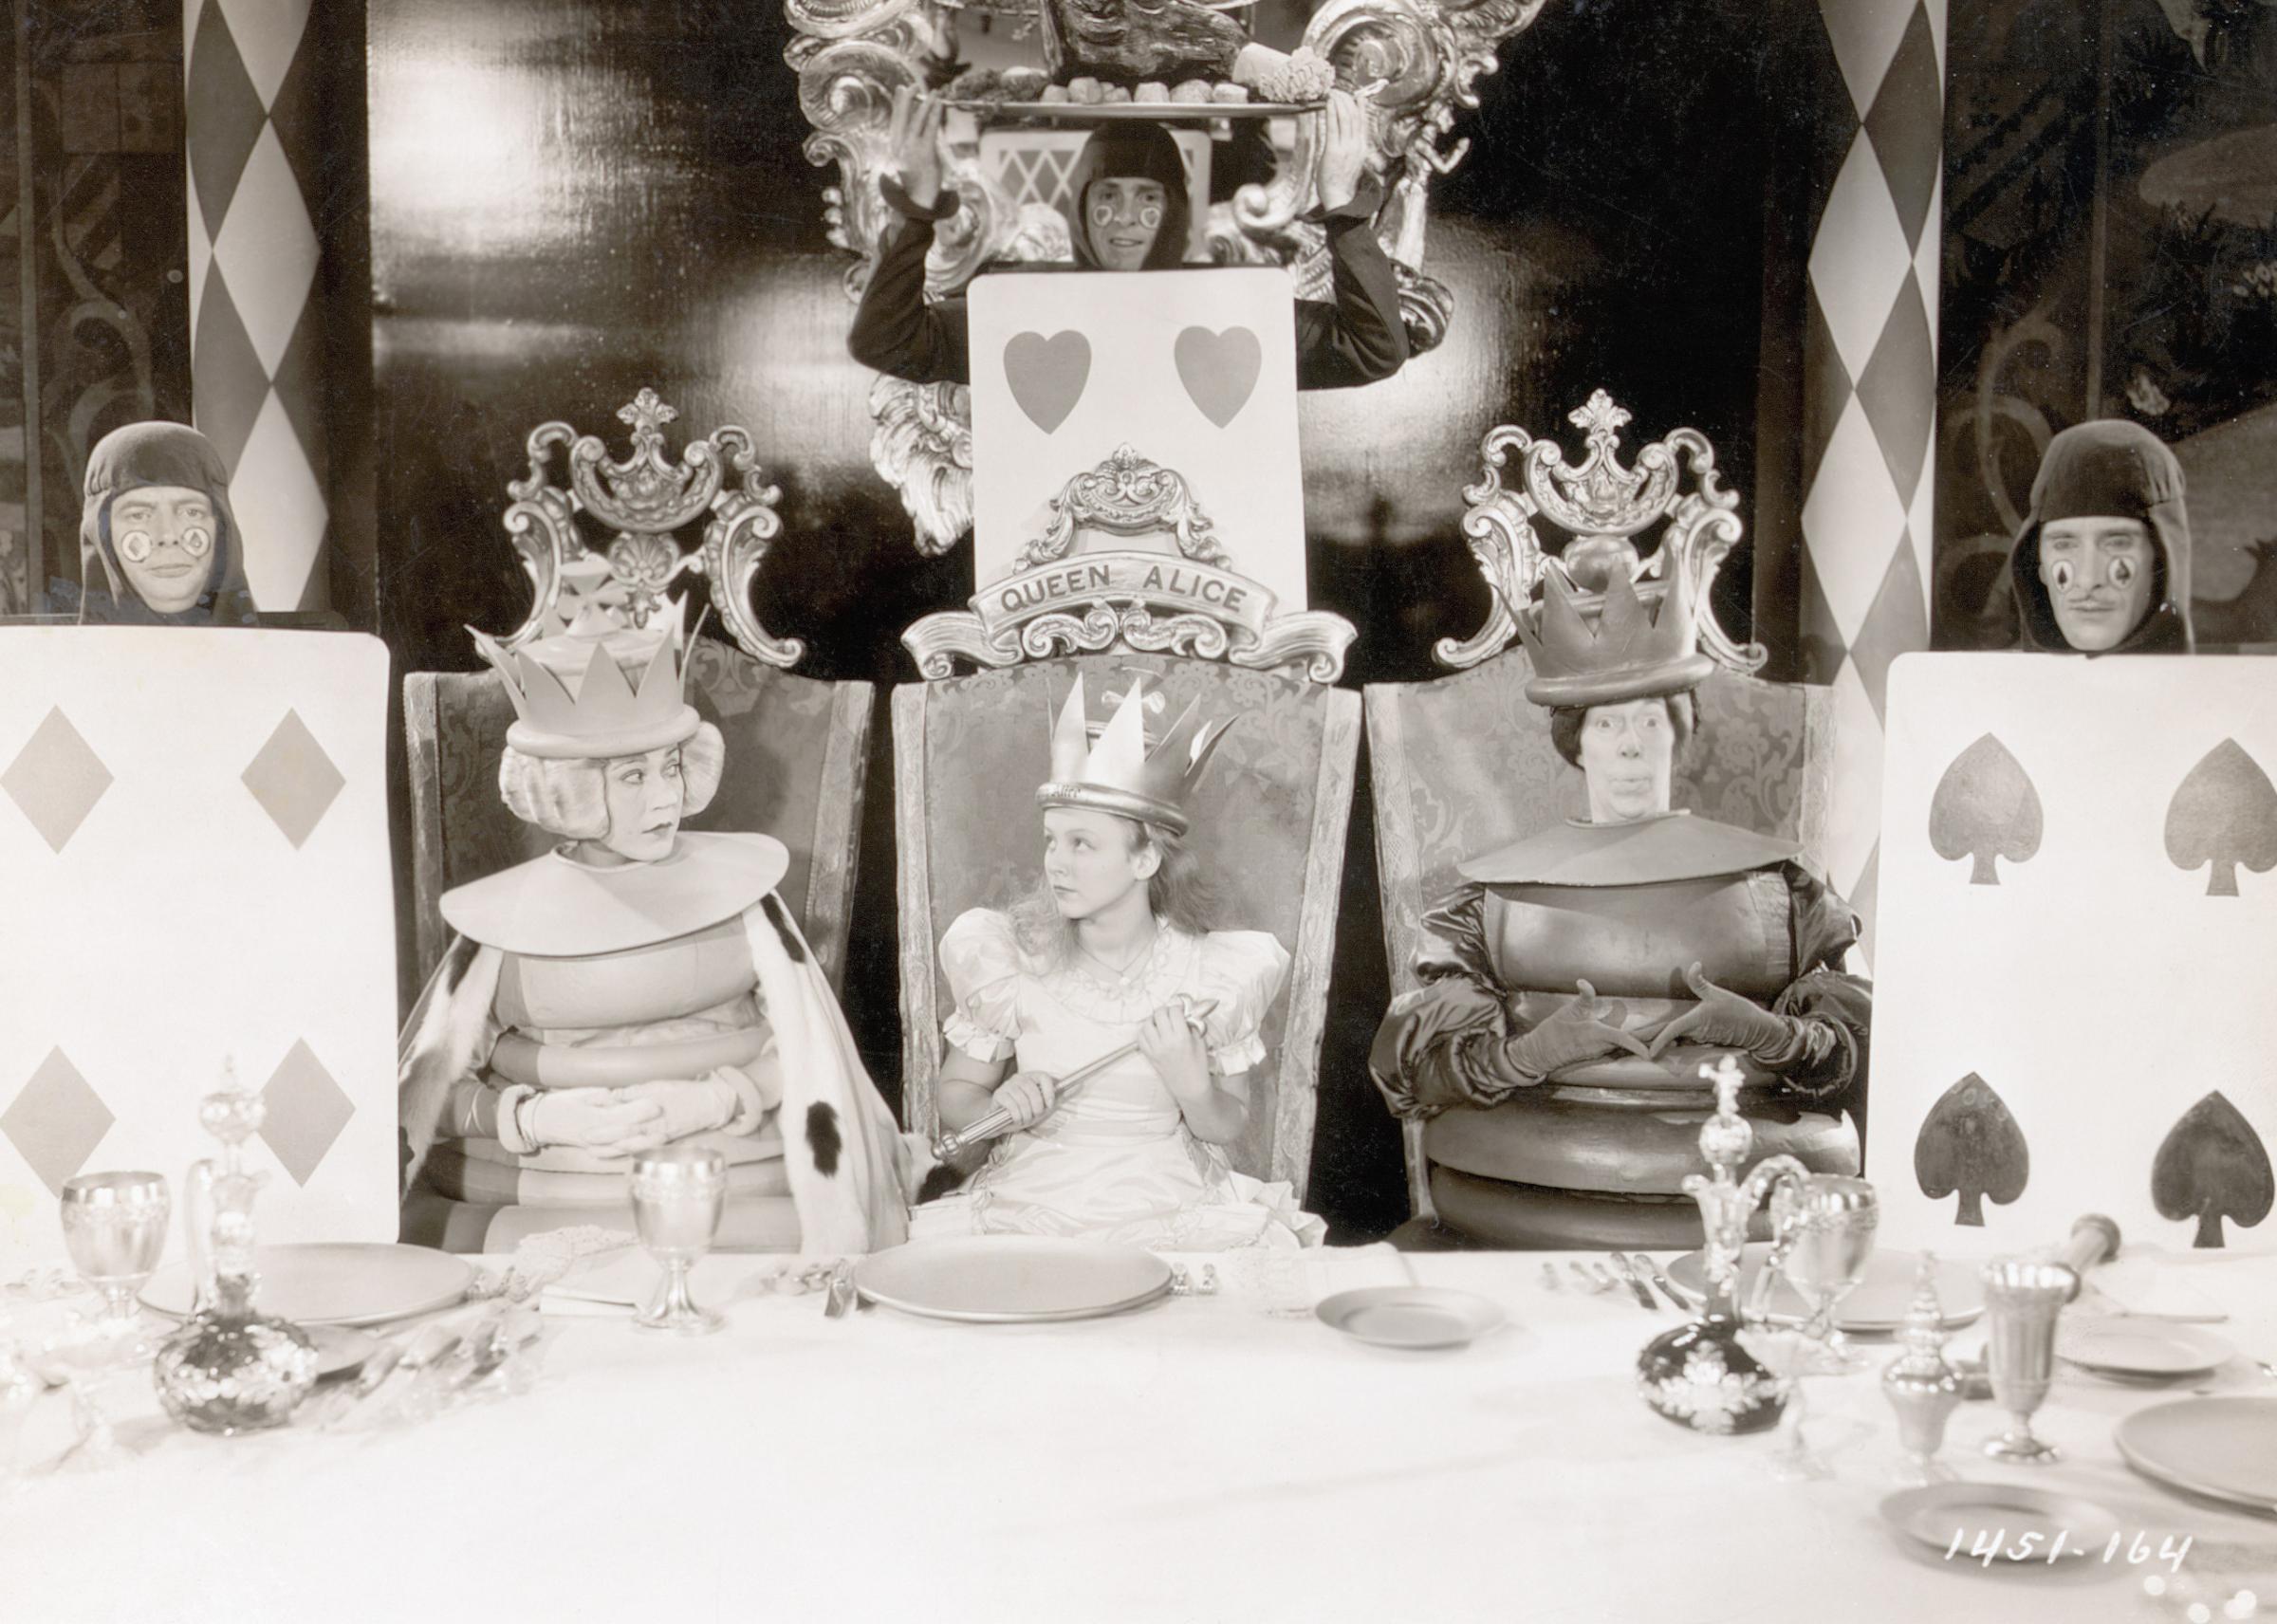 Scene from the movie, "Alice in Wonderland", written by Lewis Carroll. Alice (Charlotte Henry) is shown seated between the two chess pieces in a chair with "Queen Alice" written on it, 1933.